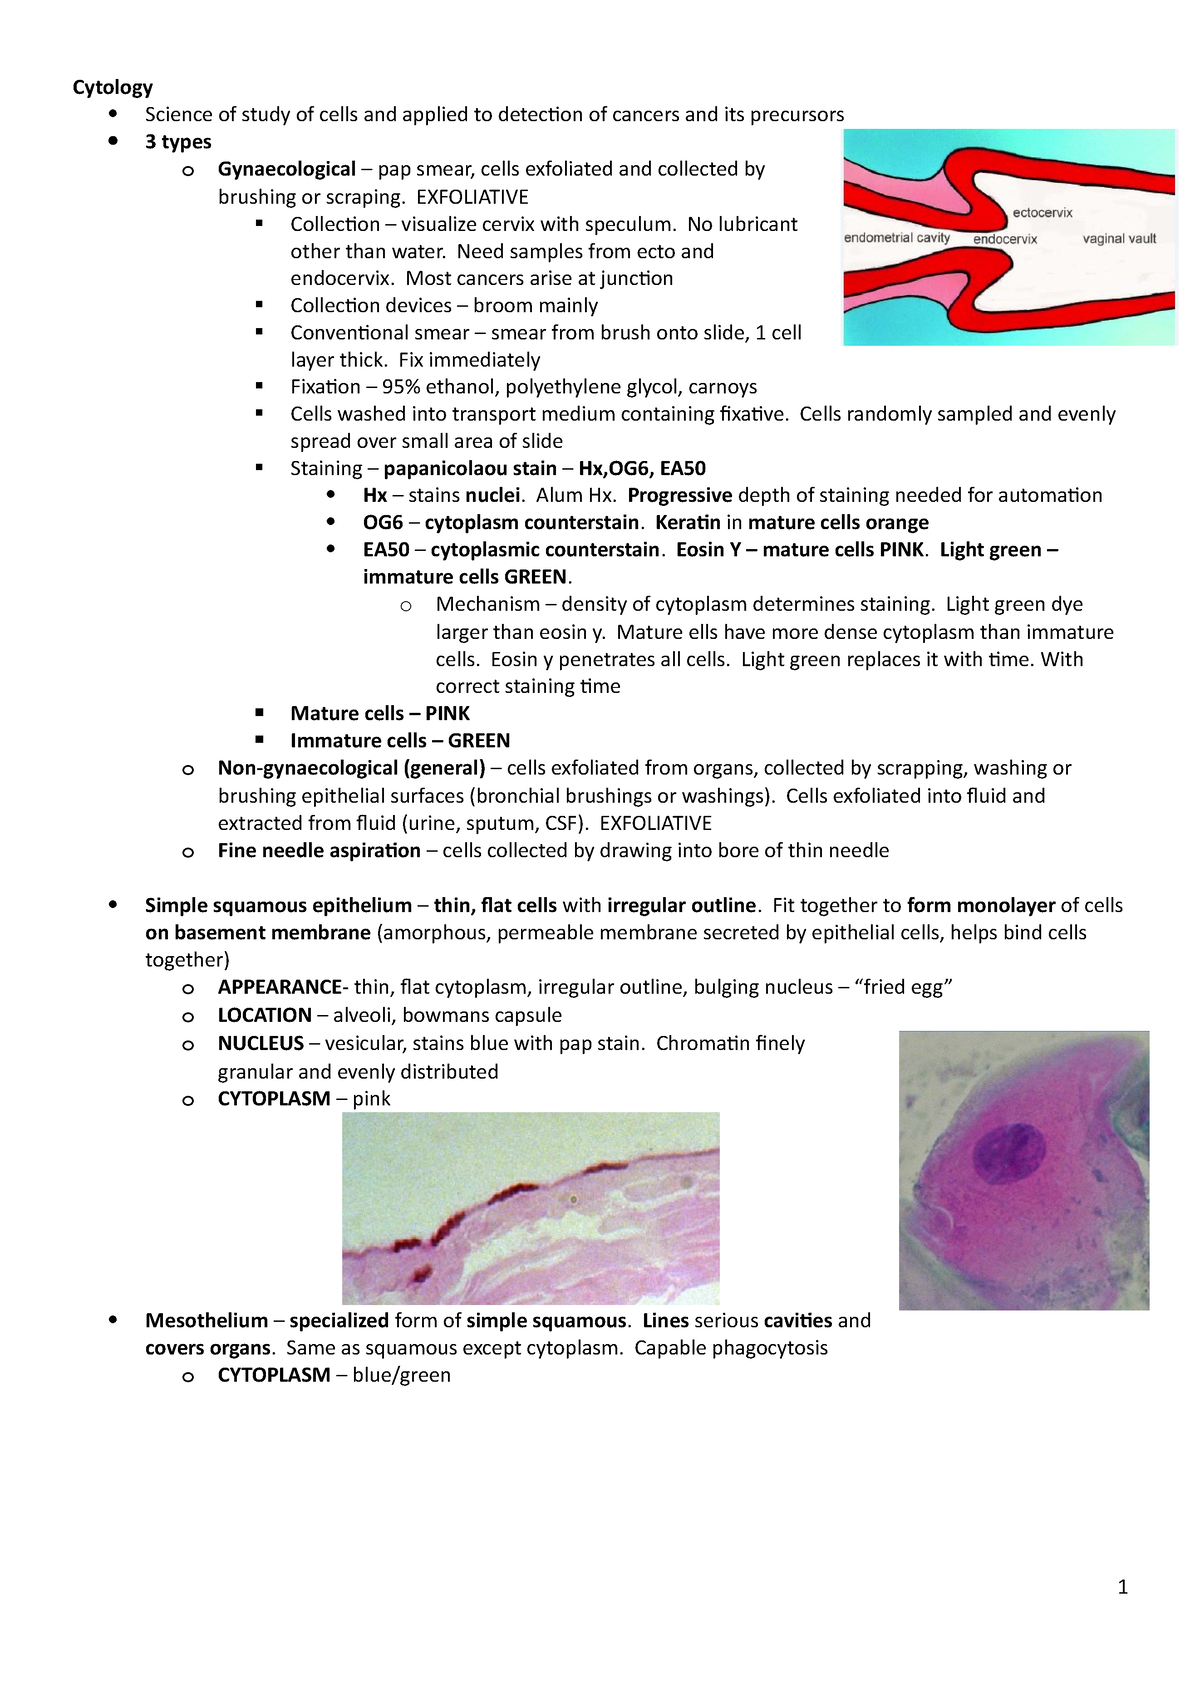 Histopath Summary Notes - Cytology Science of study of cells and ...